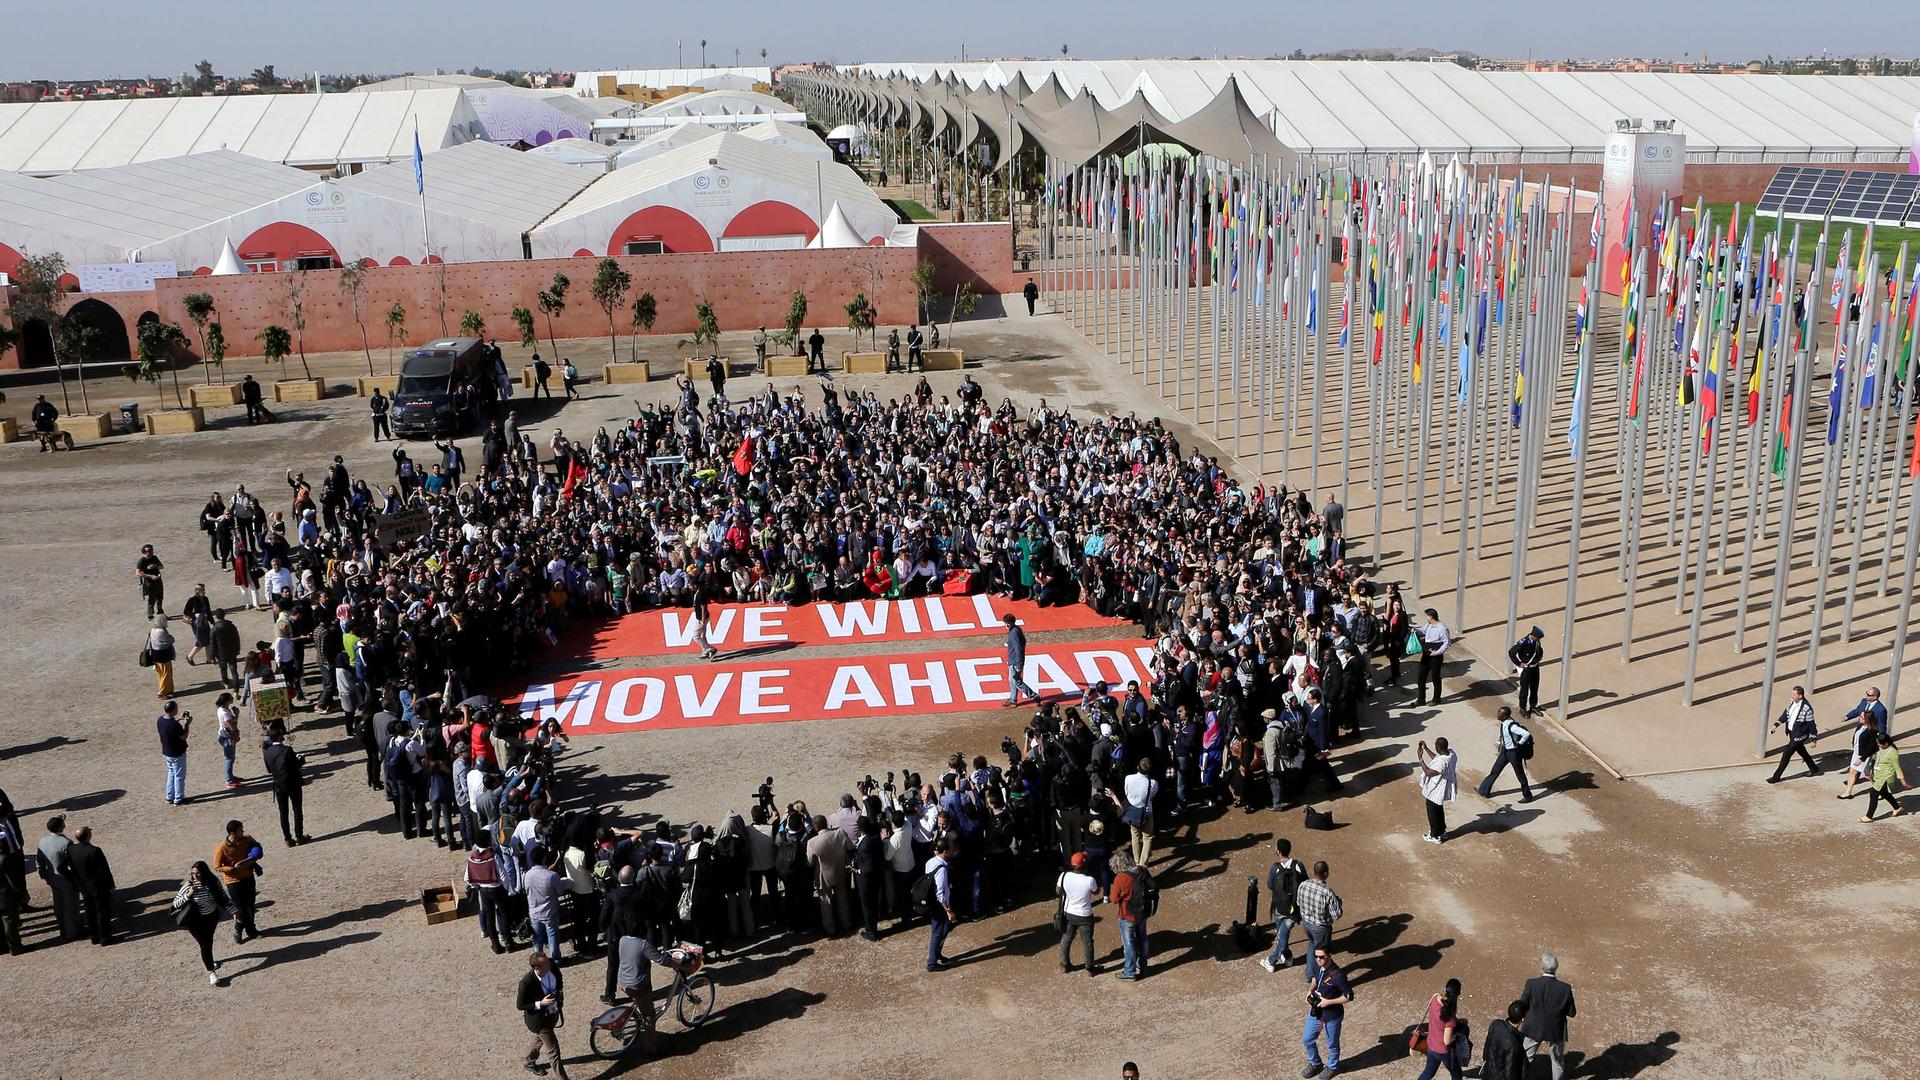 Greenpeace activists stage a protest outside the UN Climate Change Conference in Marrakech, Morocco.